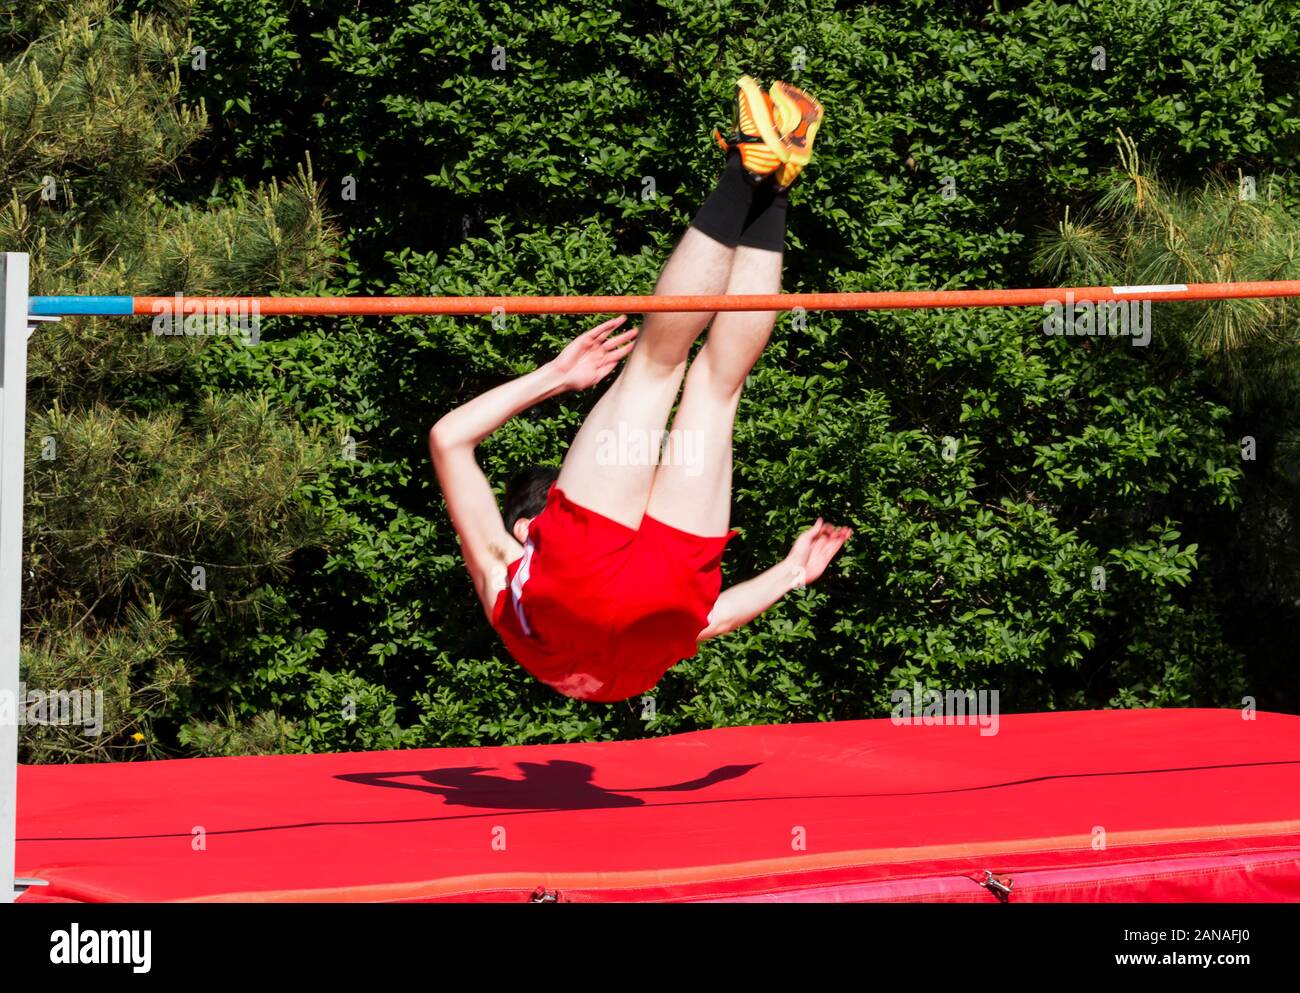 A high school track and field athlete clears the high jump bar and is about to land on the red mats. Stock Photo